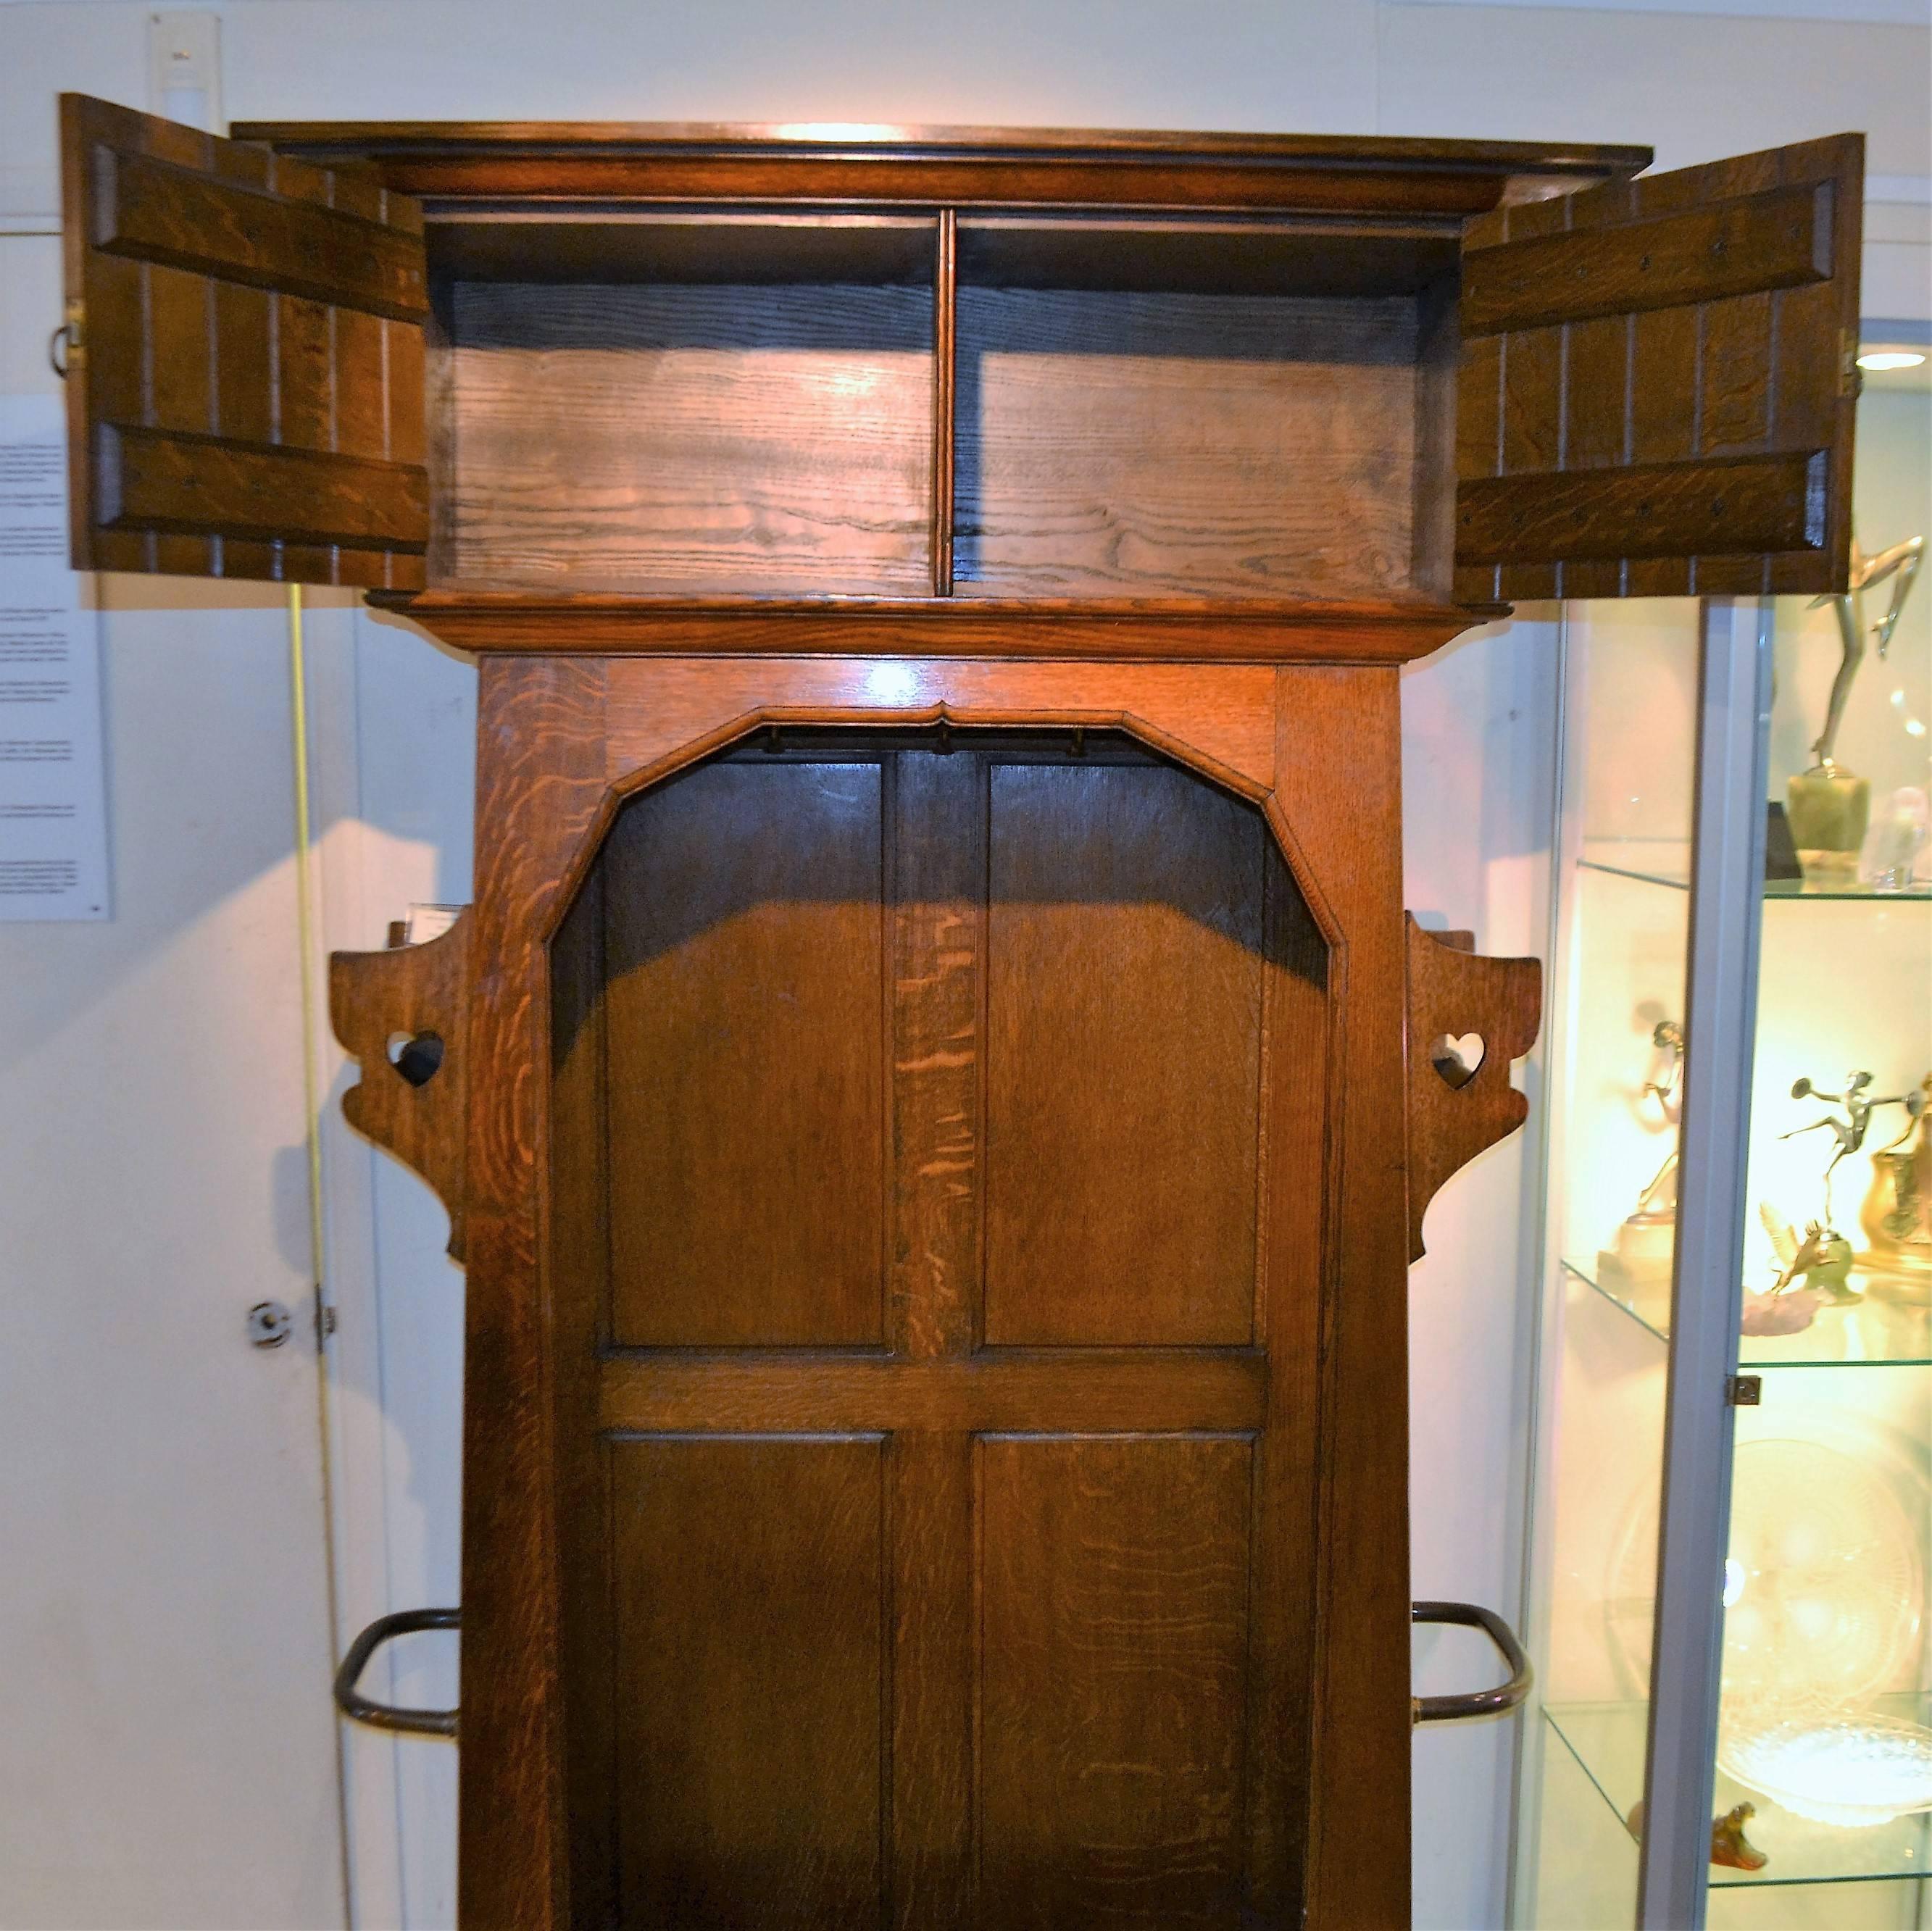 A hall cupboard by leading British manufacturer of Arts & Crafts furniture, Shapland and Petter of Barnstaple. This piece in oak with repousse copper strapwork was designed by their gifted in-house designer William Cowie, circa 1900.

Shapland and